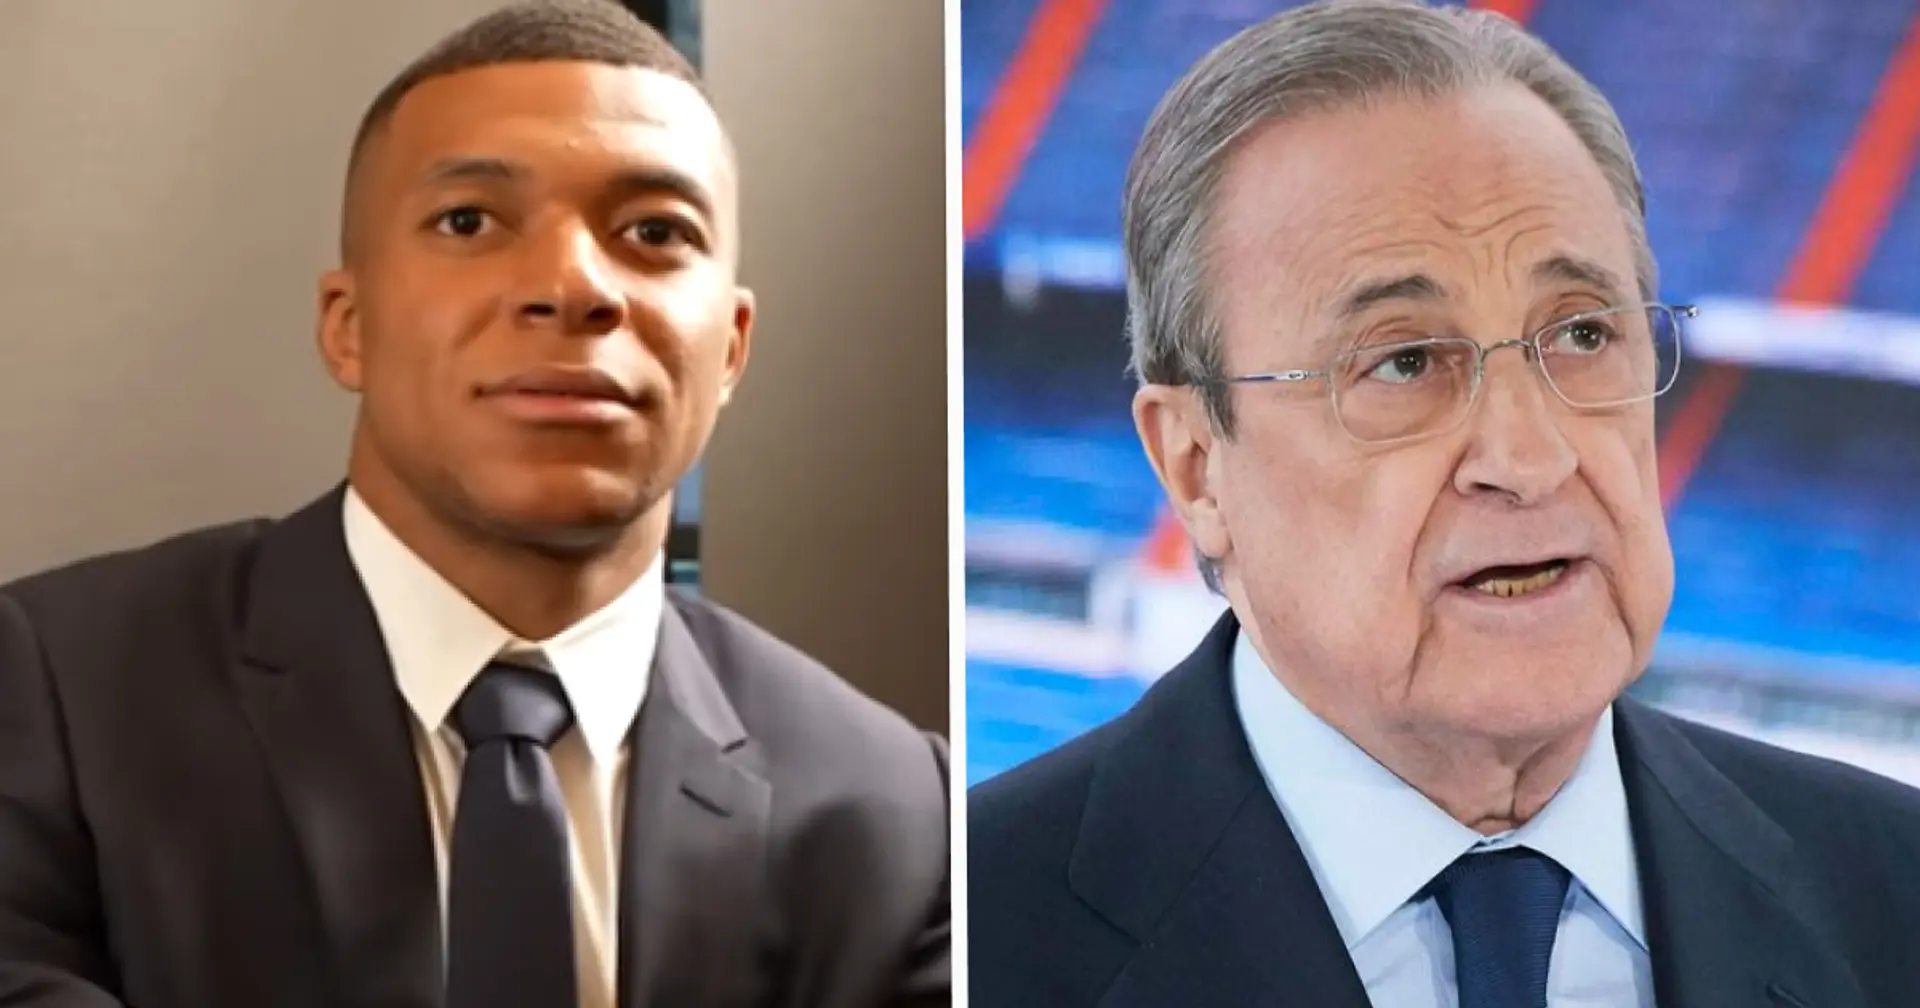 Real Madrid make final decision on future signing of Mbappe (reliability: 4 stars)